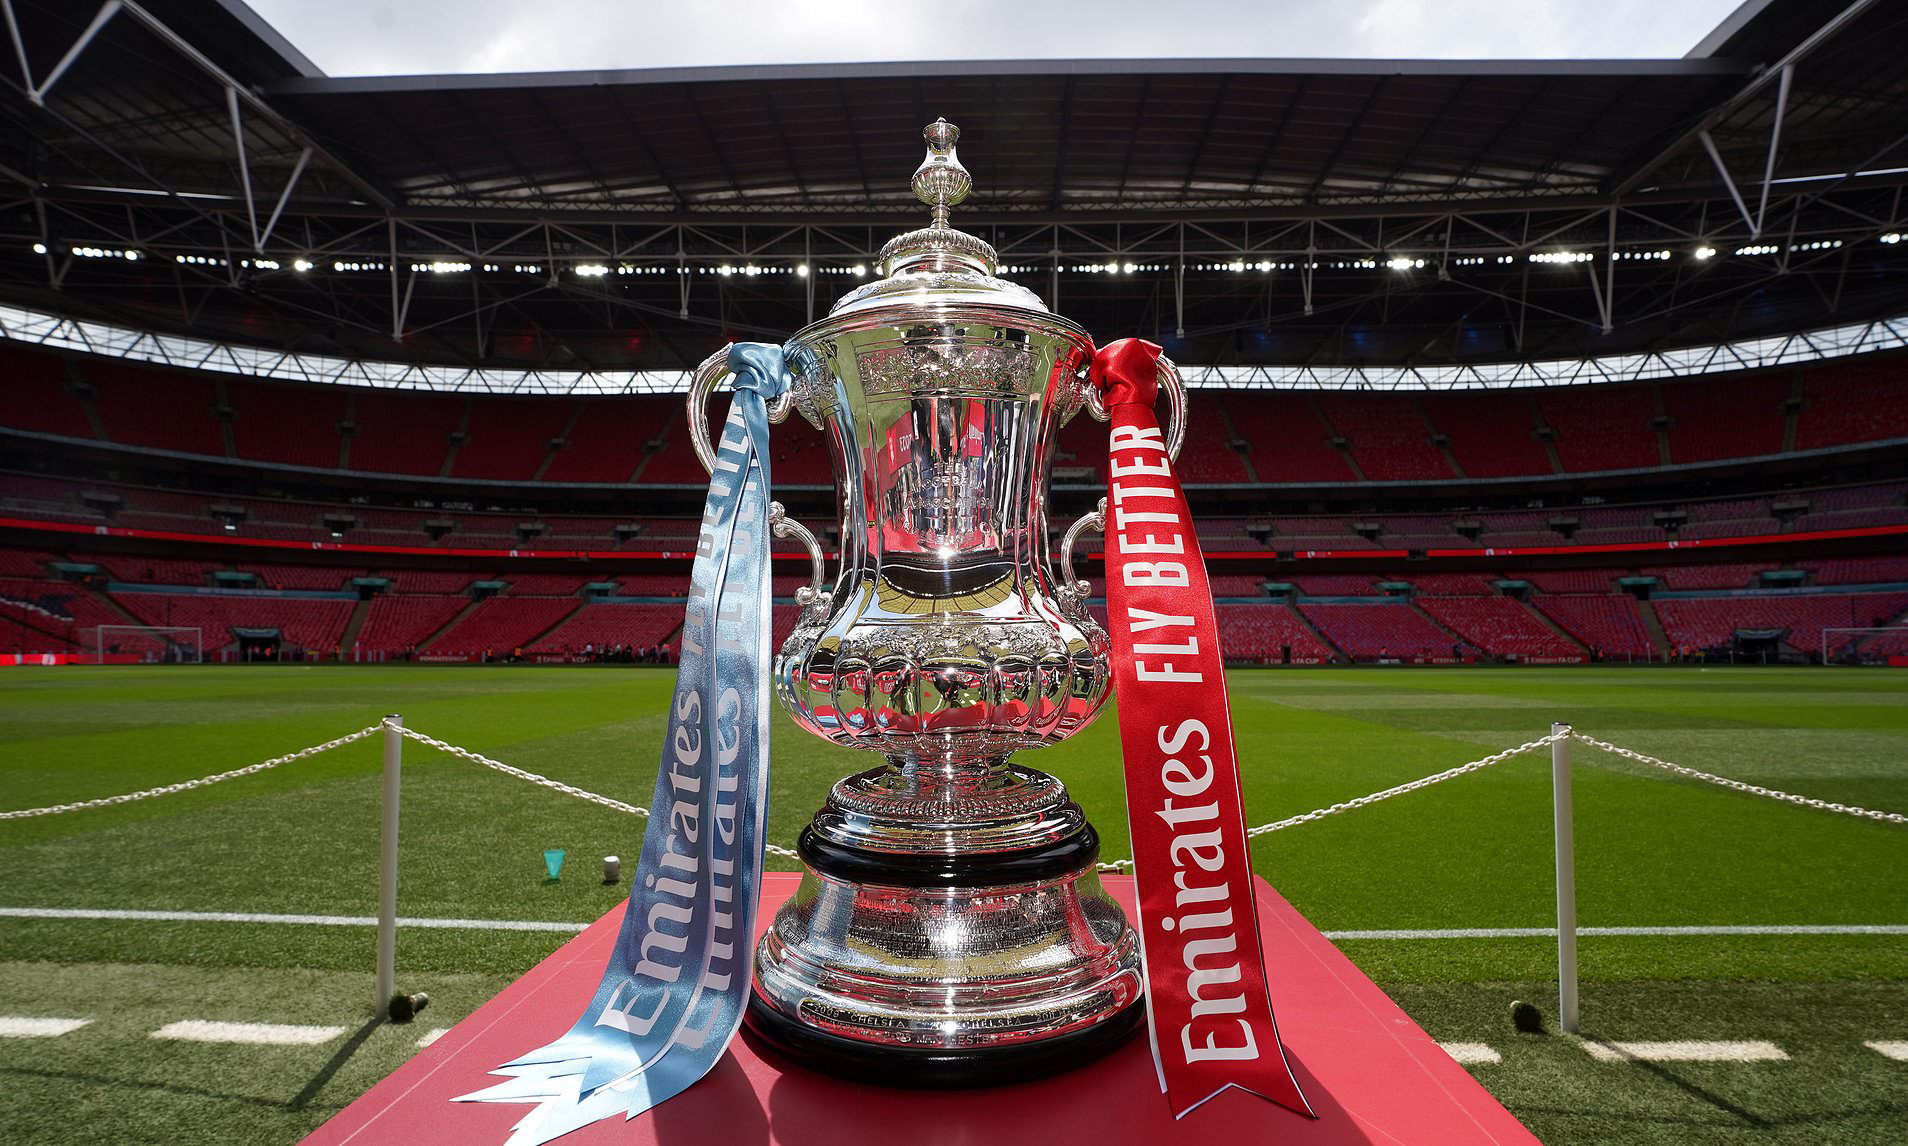 FA CUP FOURTH ROUND DRAW: Tottenham host Man City in pick of the ties